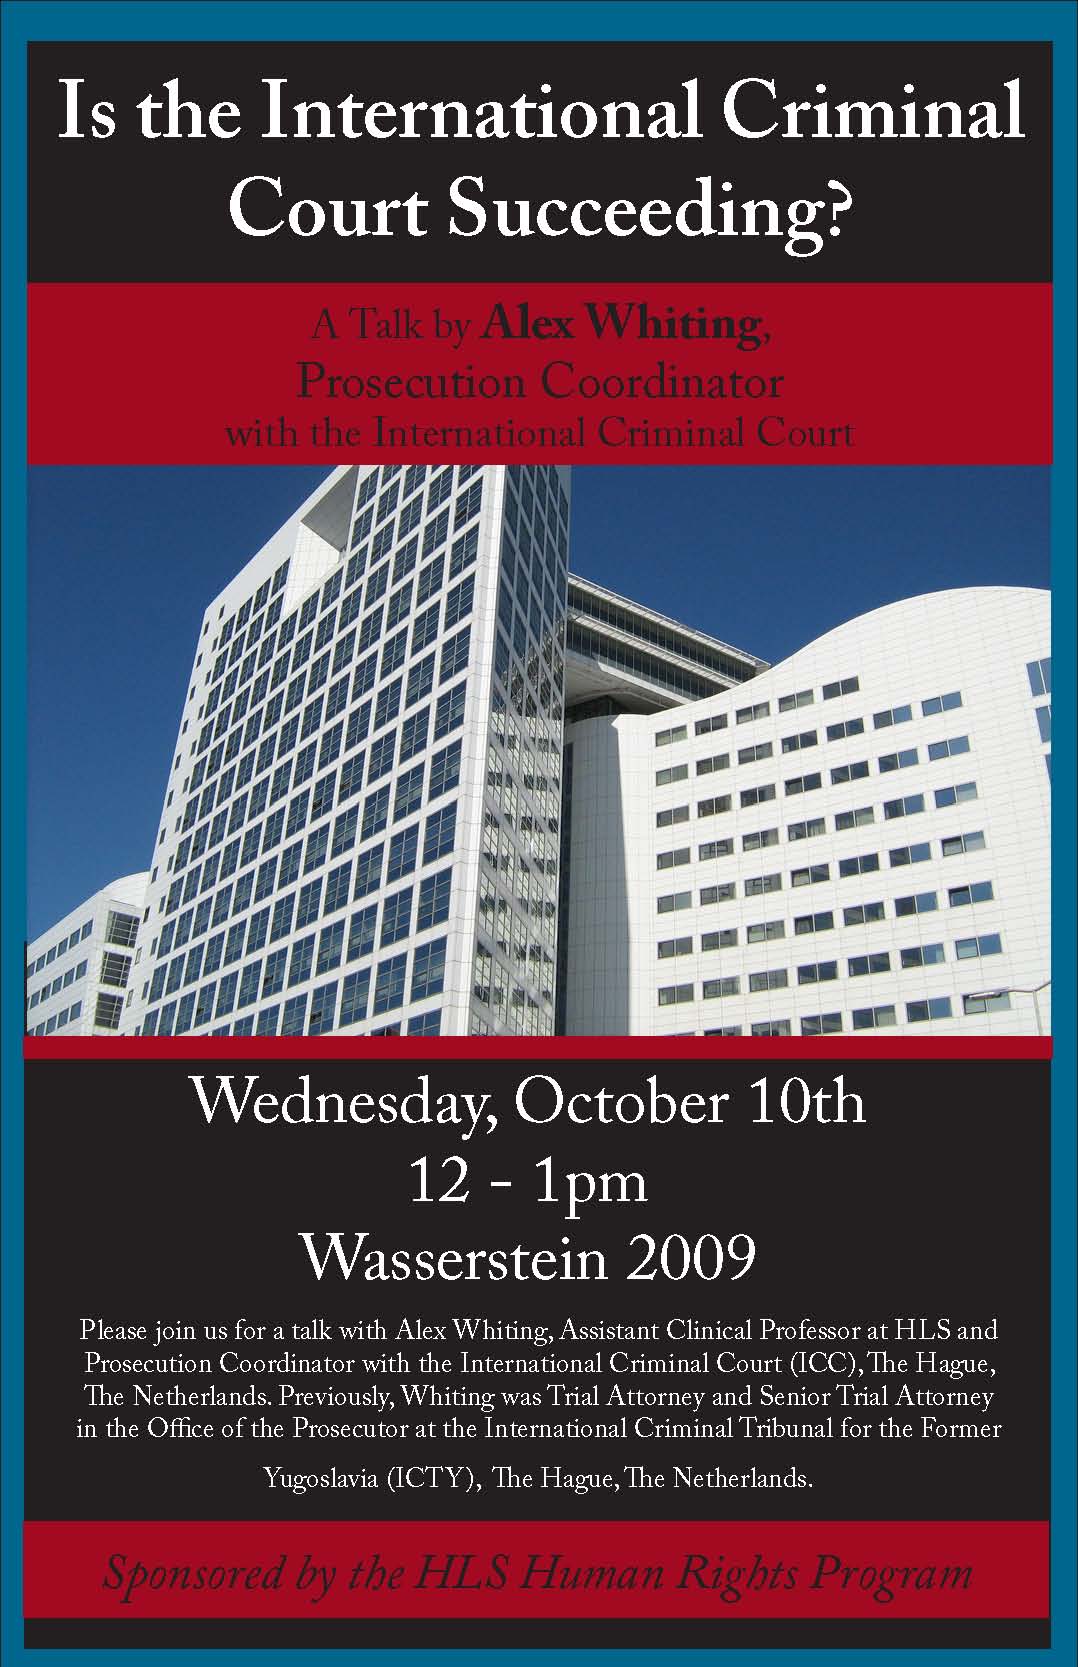 Event poster shows an image of the International Criminal Court building.